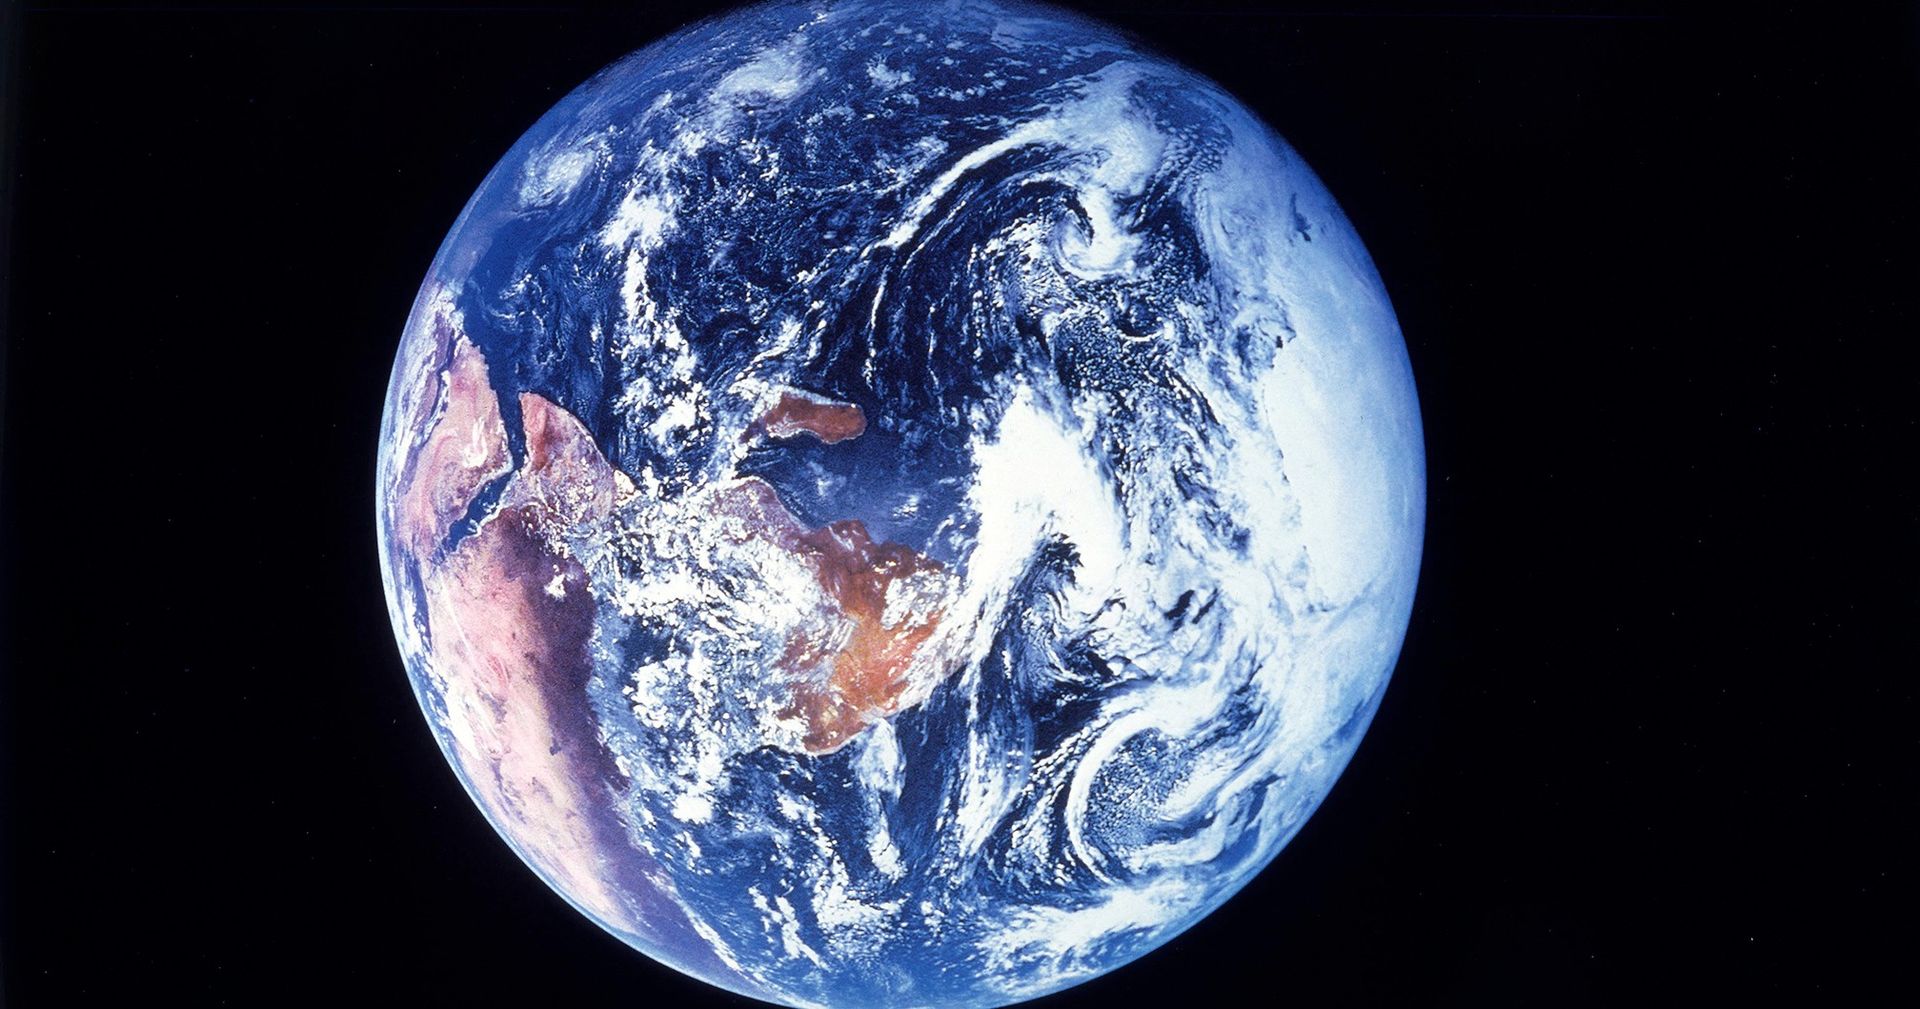 The planet Earth as seen from space.